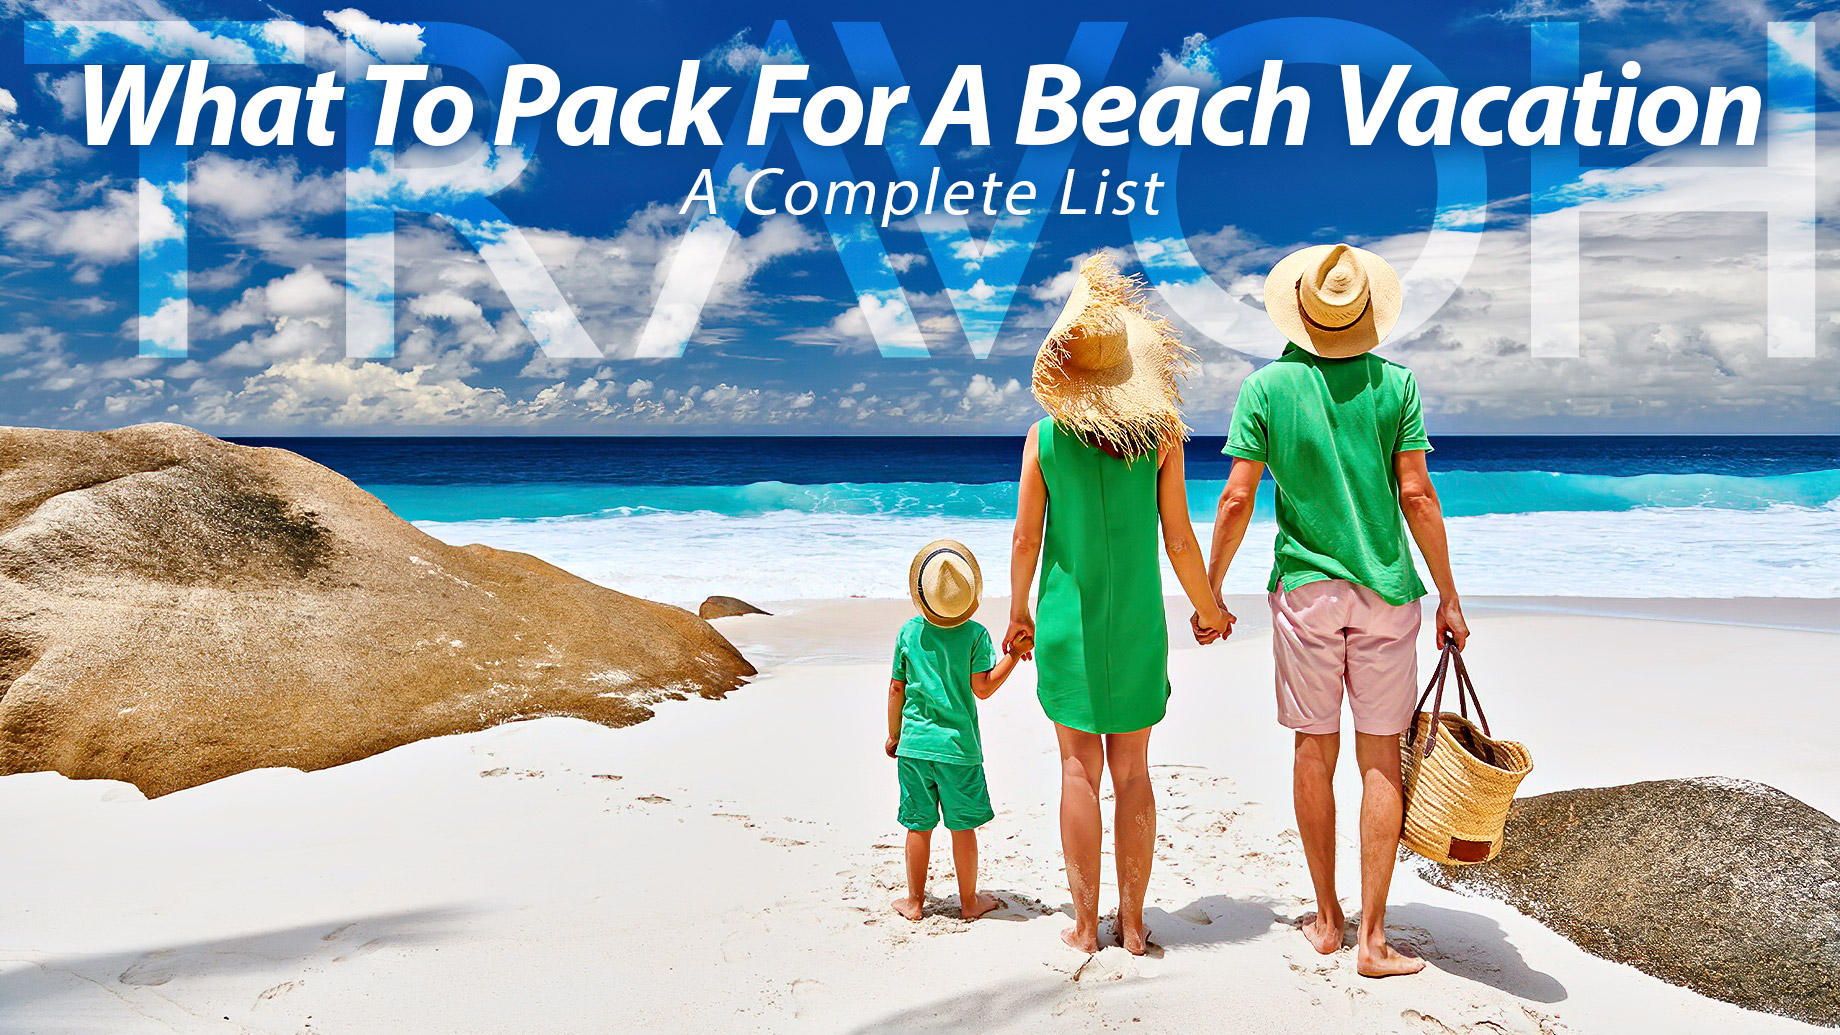 What To Pack For A Beach Vacation: A Complete List